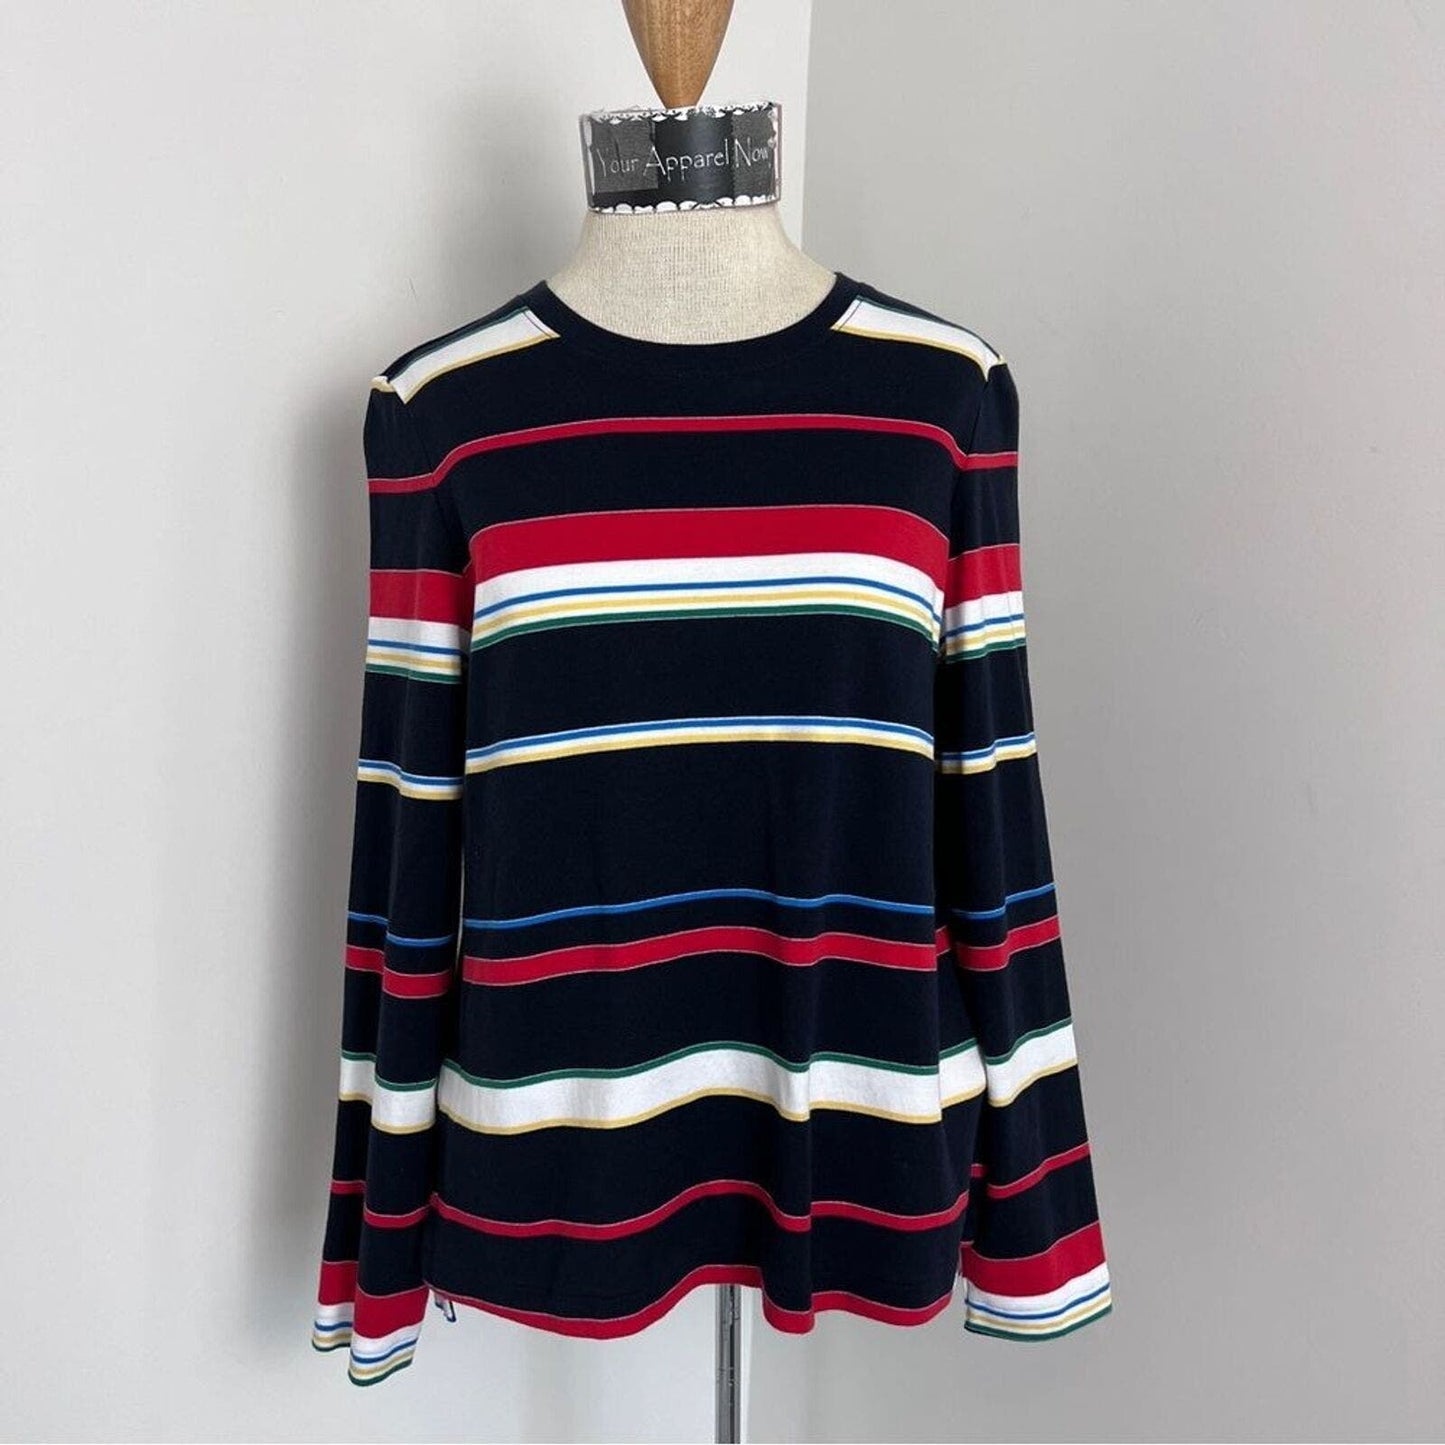 Brooks Brothers Stripes Long Sleeve Thin Sweater size M (350)